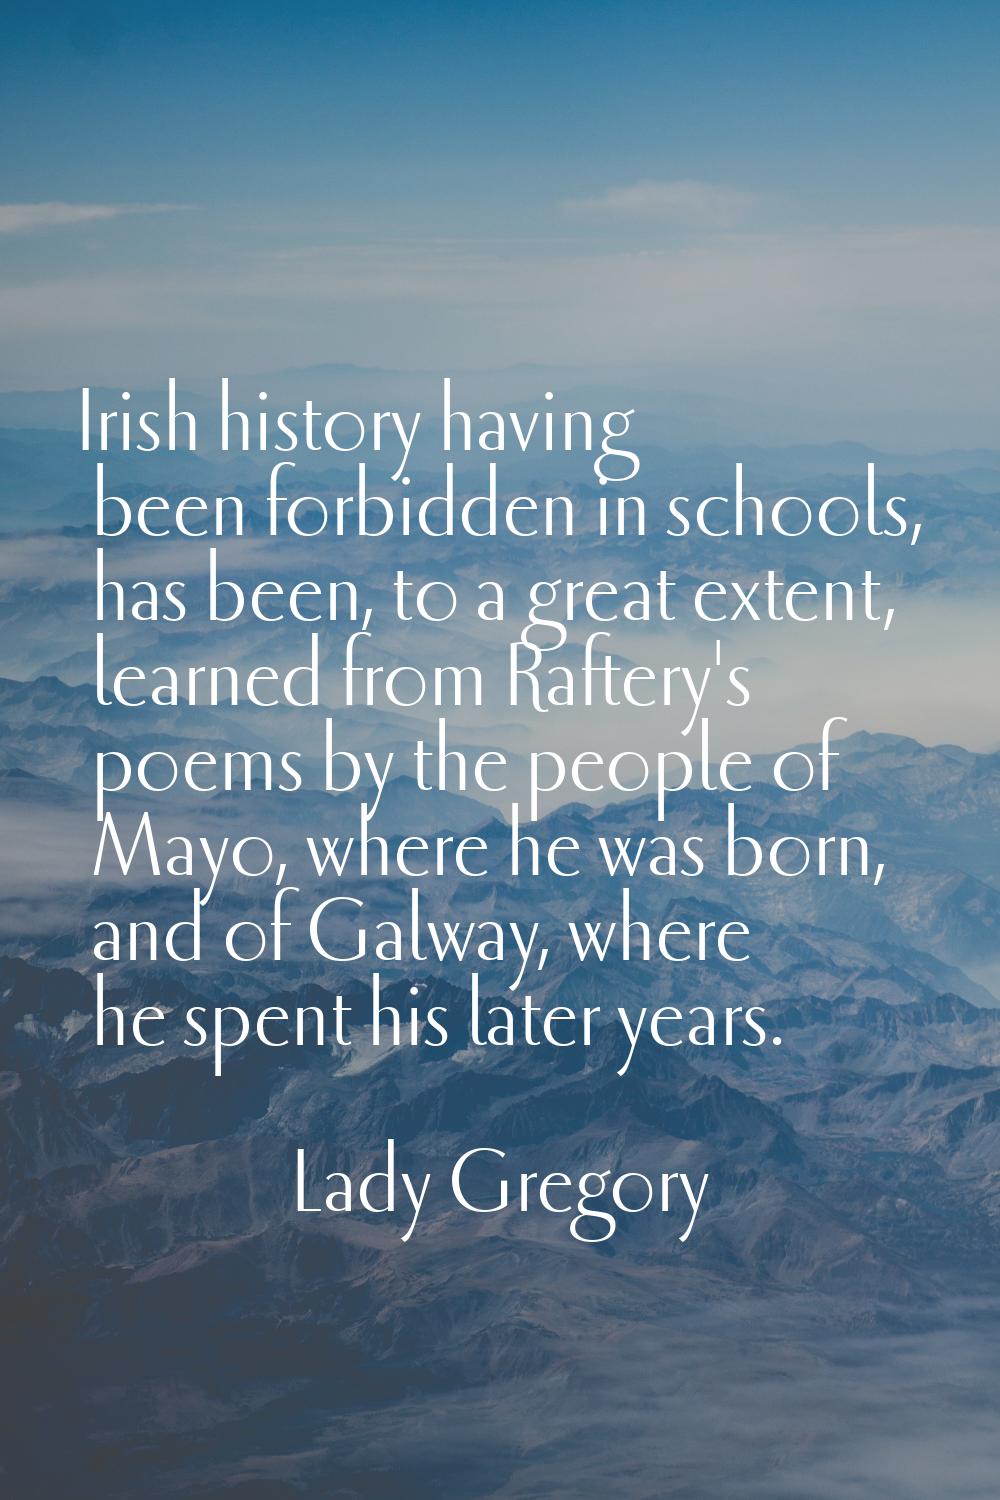 Irish history having been forbidden in schools, has been, to a great extent, learned from Raftery's